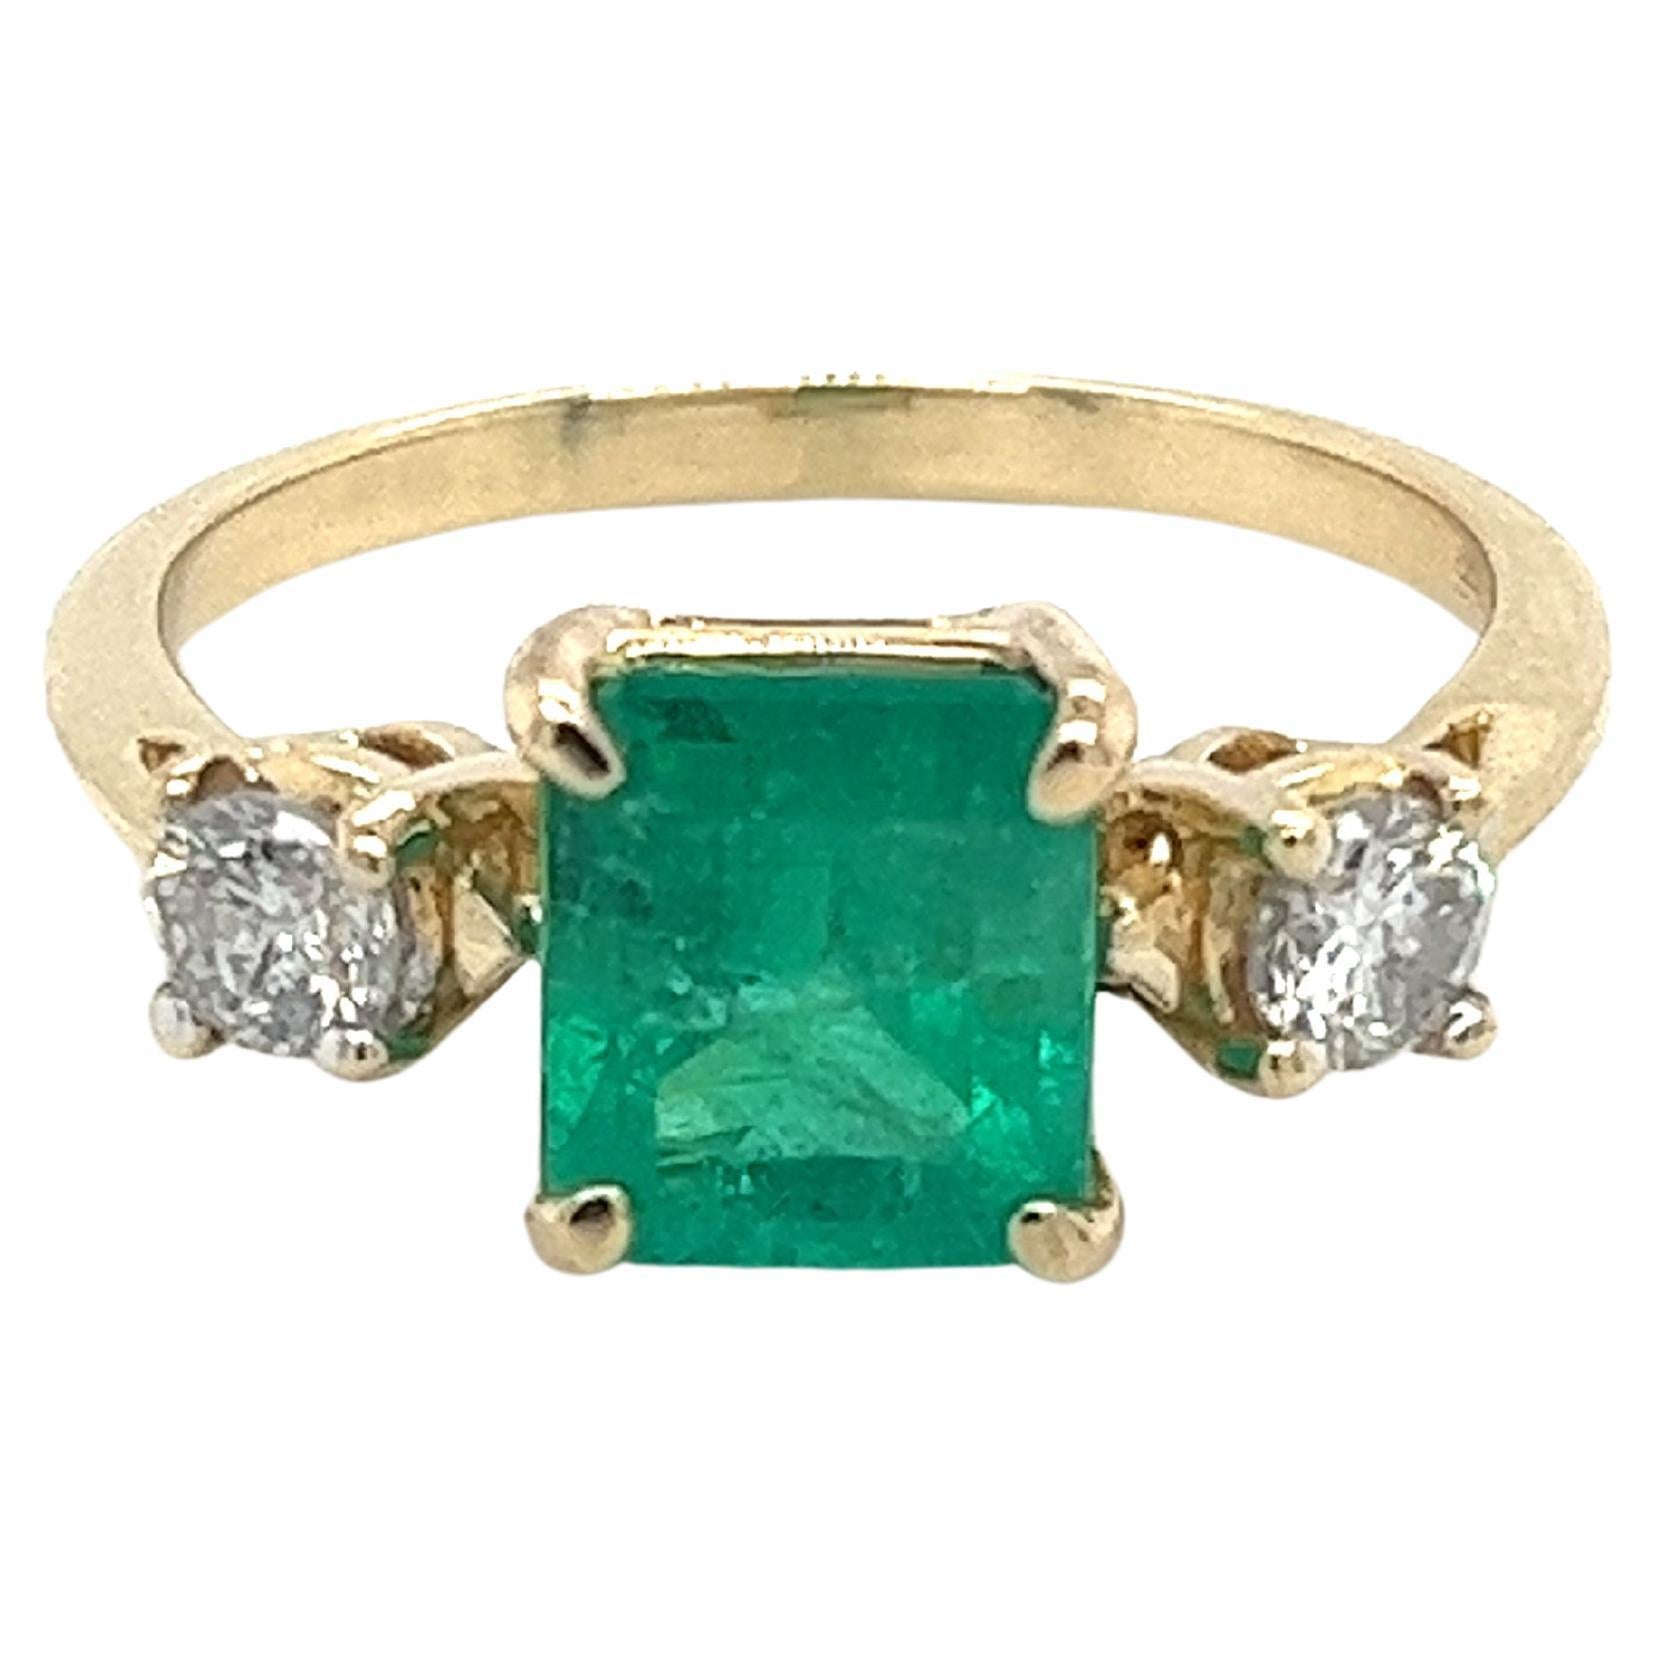 Natural 2.05 carat Colombian emerald and diamond three stone ring in 14k solid yellow gold. Featuring an elegantly thin band that accentuates the center stones. A dainty setting with a center stone of pristine quality. The emerald is vibrant and